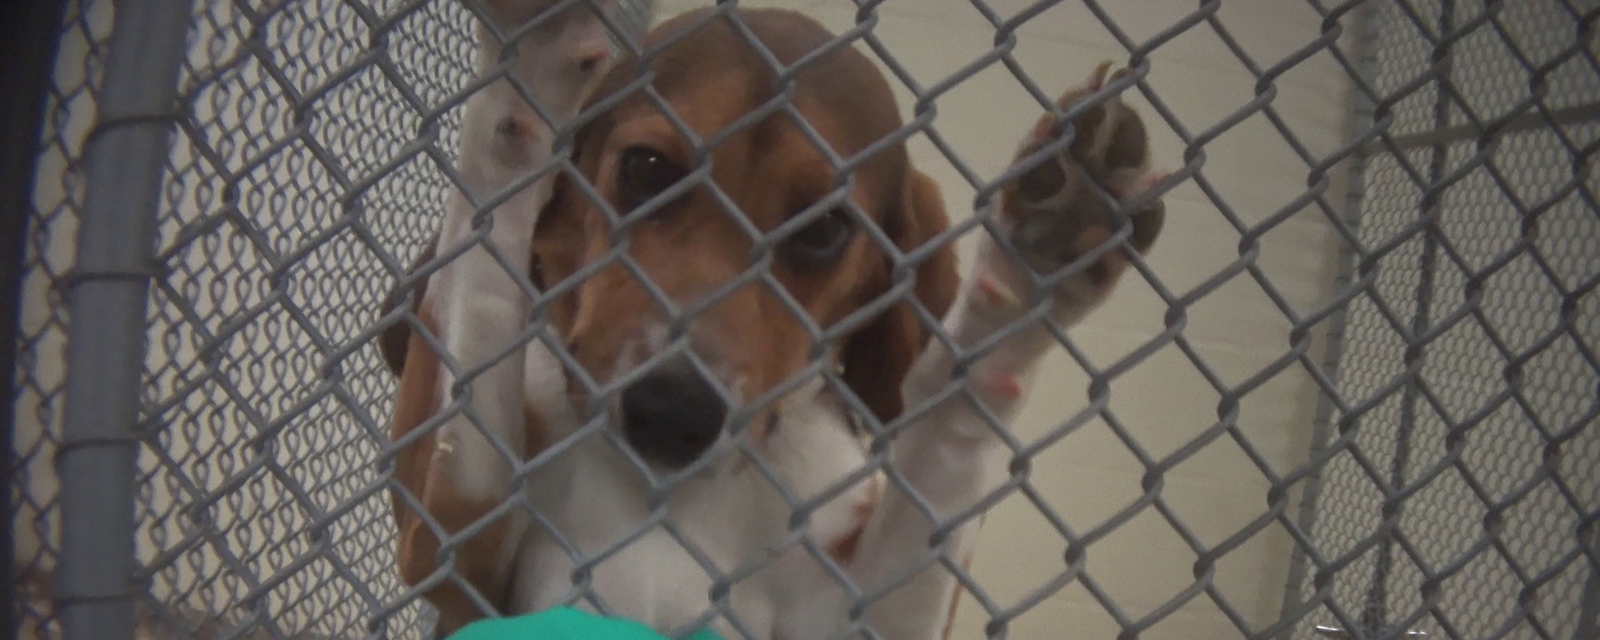 Beagle in kennel at lab